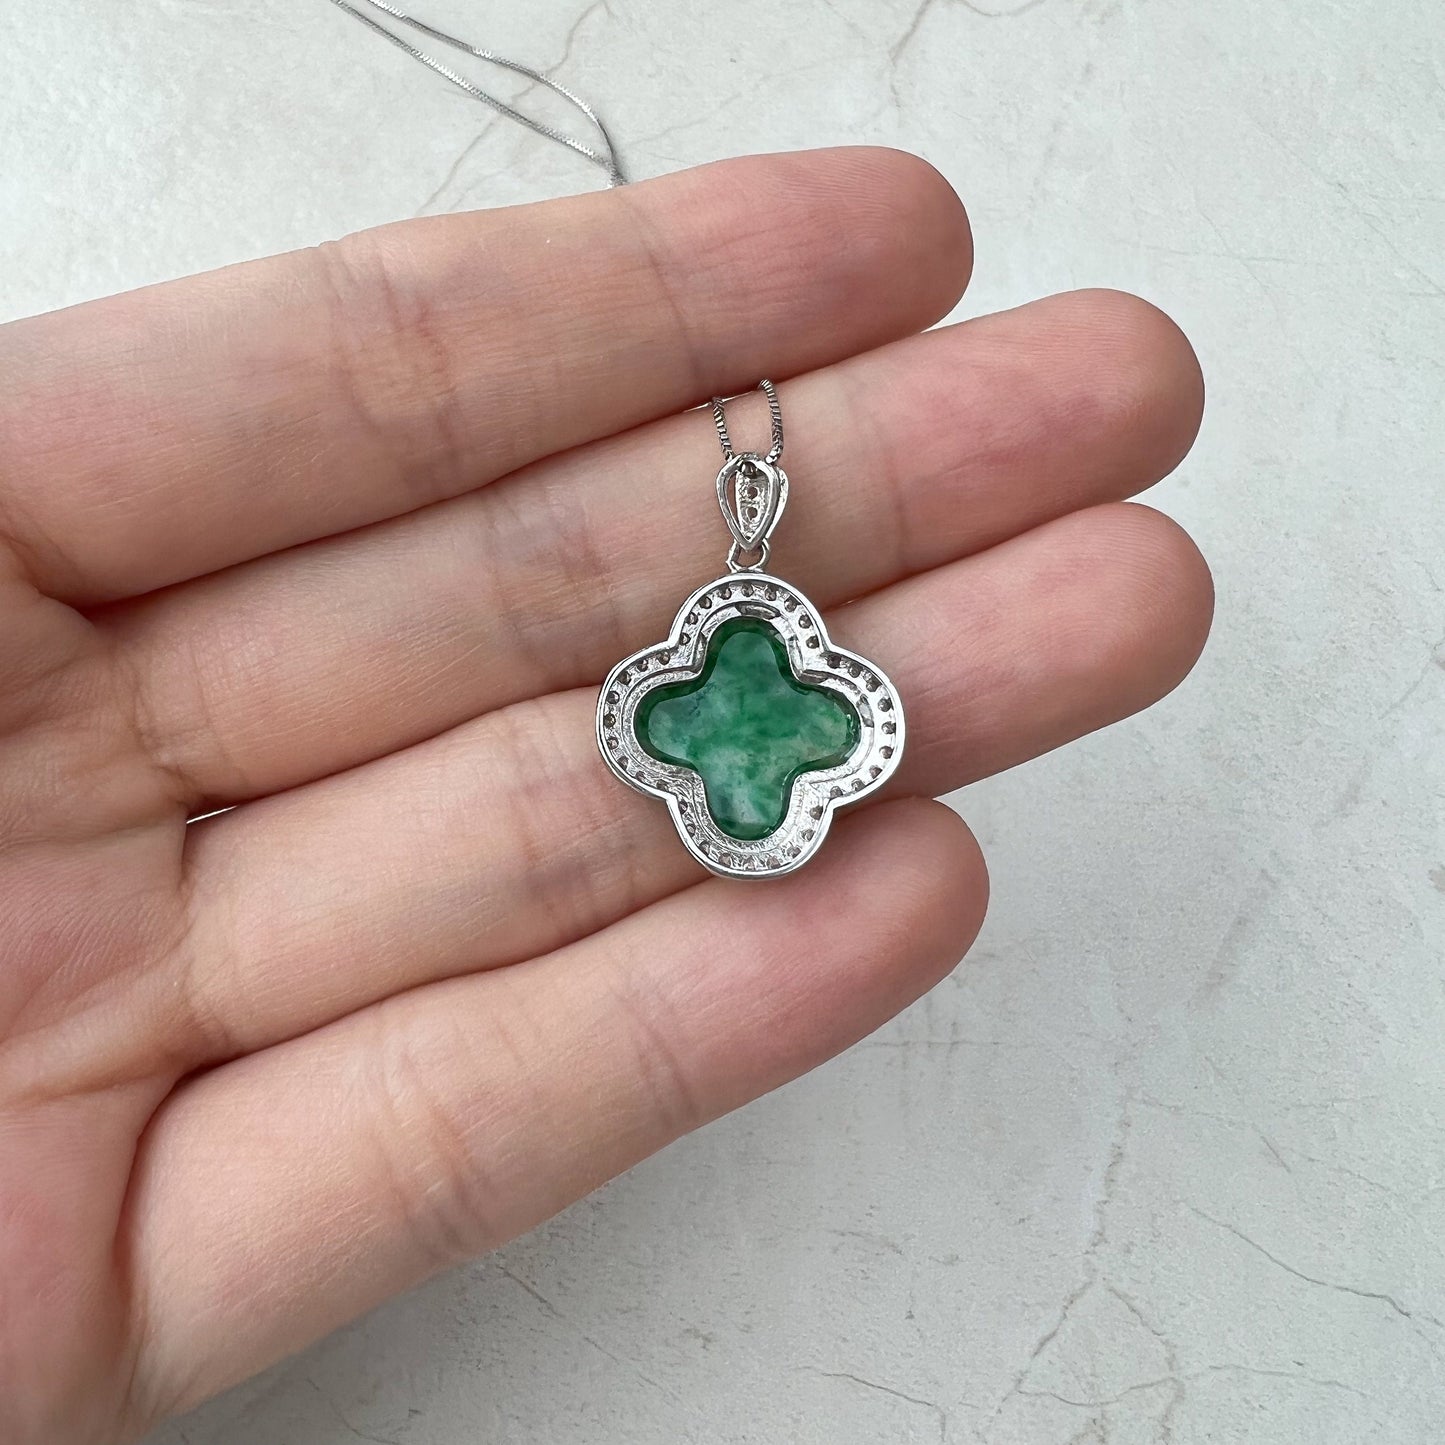 Four Leaf Clover, Jadeite Jade, Sterling Silver, Minimalist Pendant Hand Carved Necklace, TH-0921-TH0075336 - AriaDesignCollection